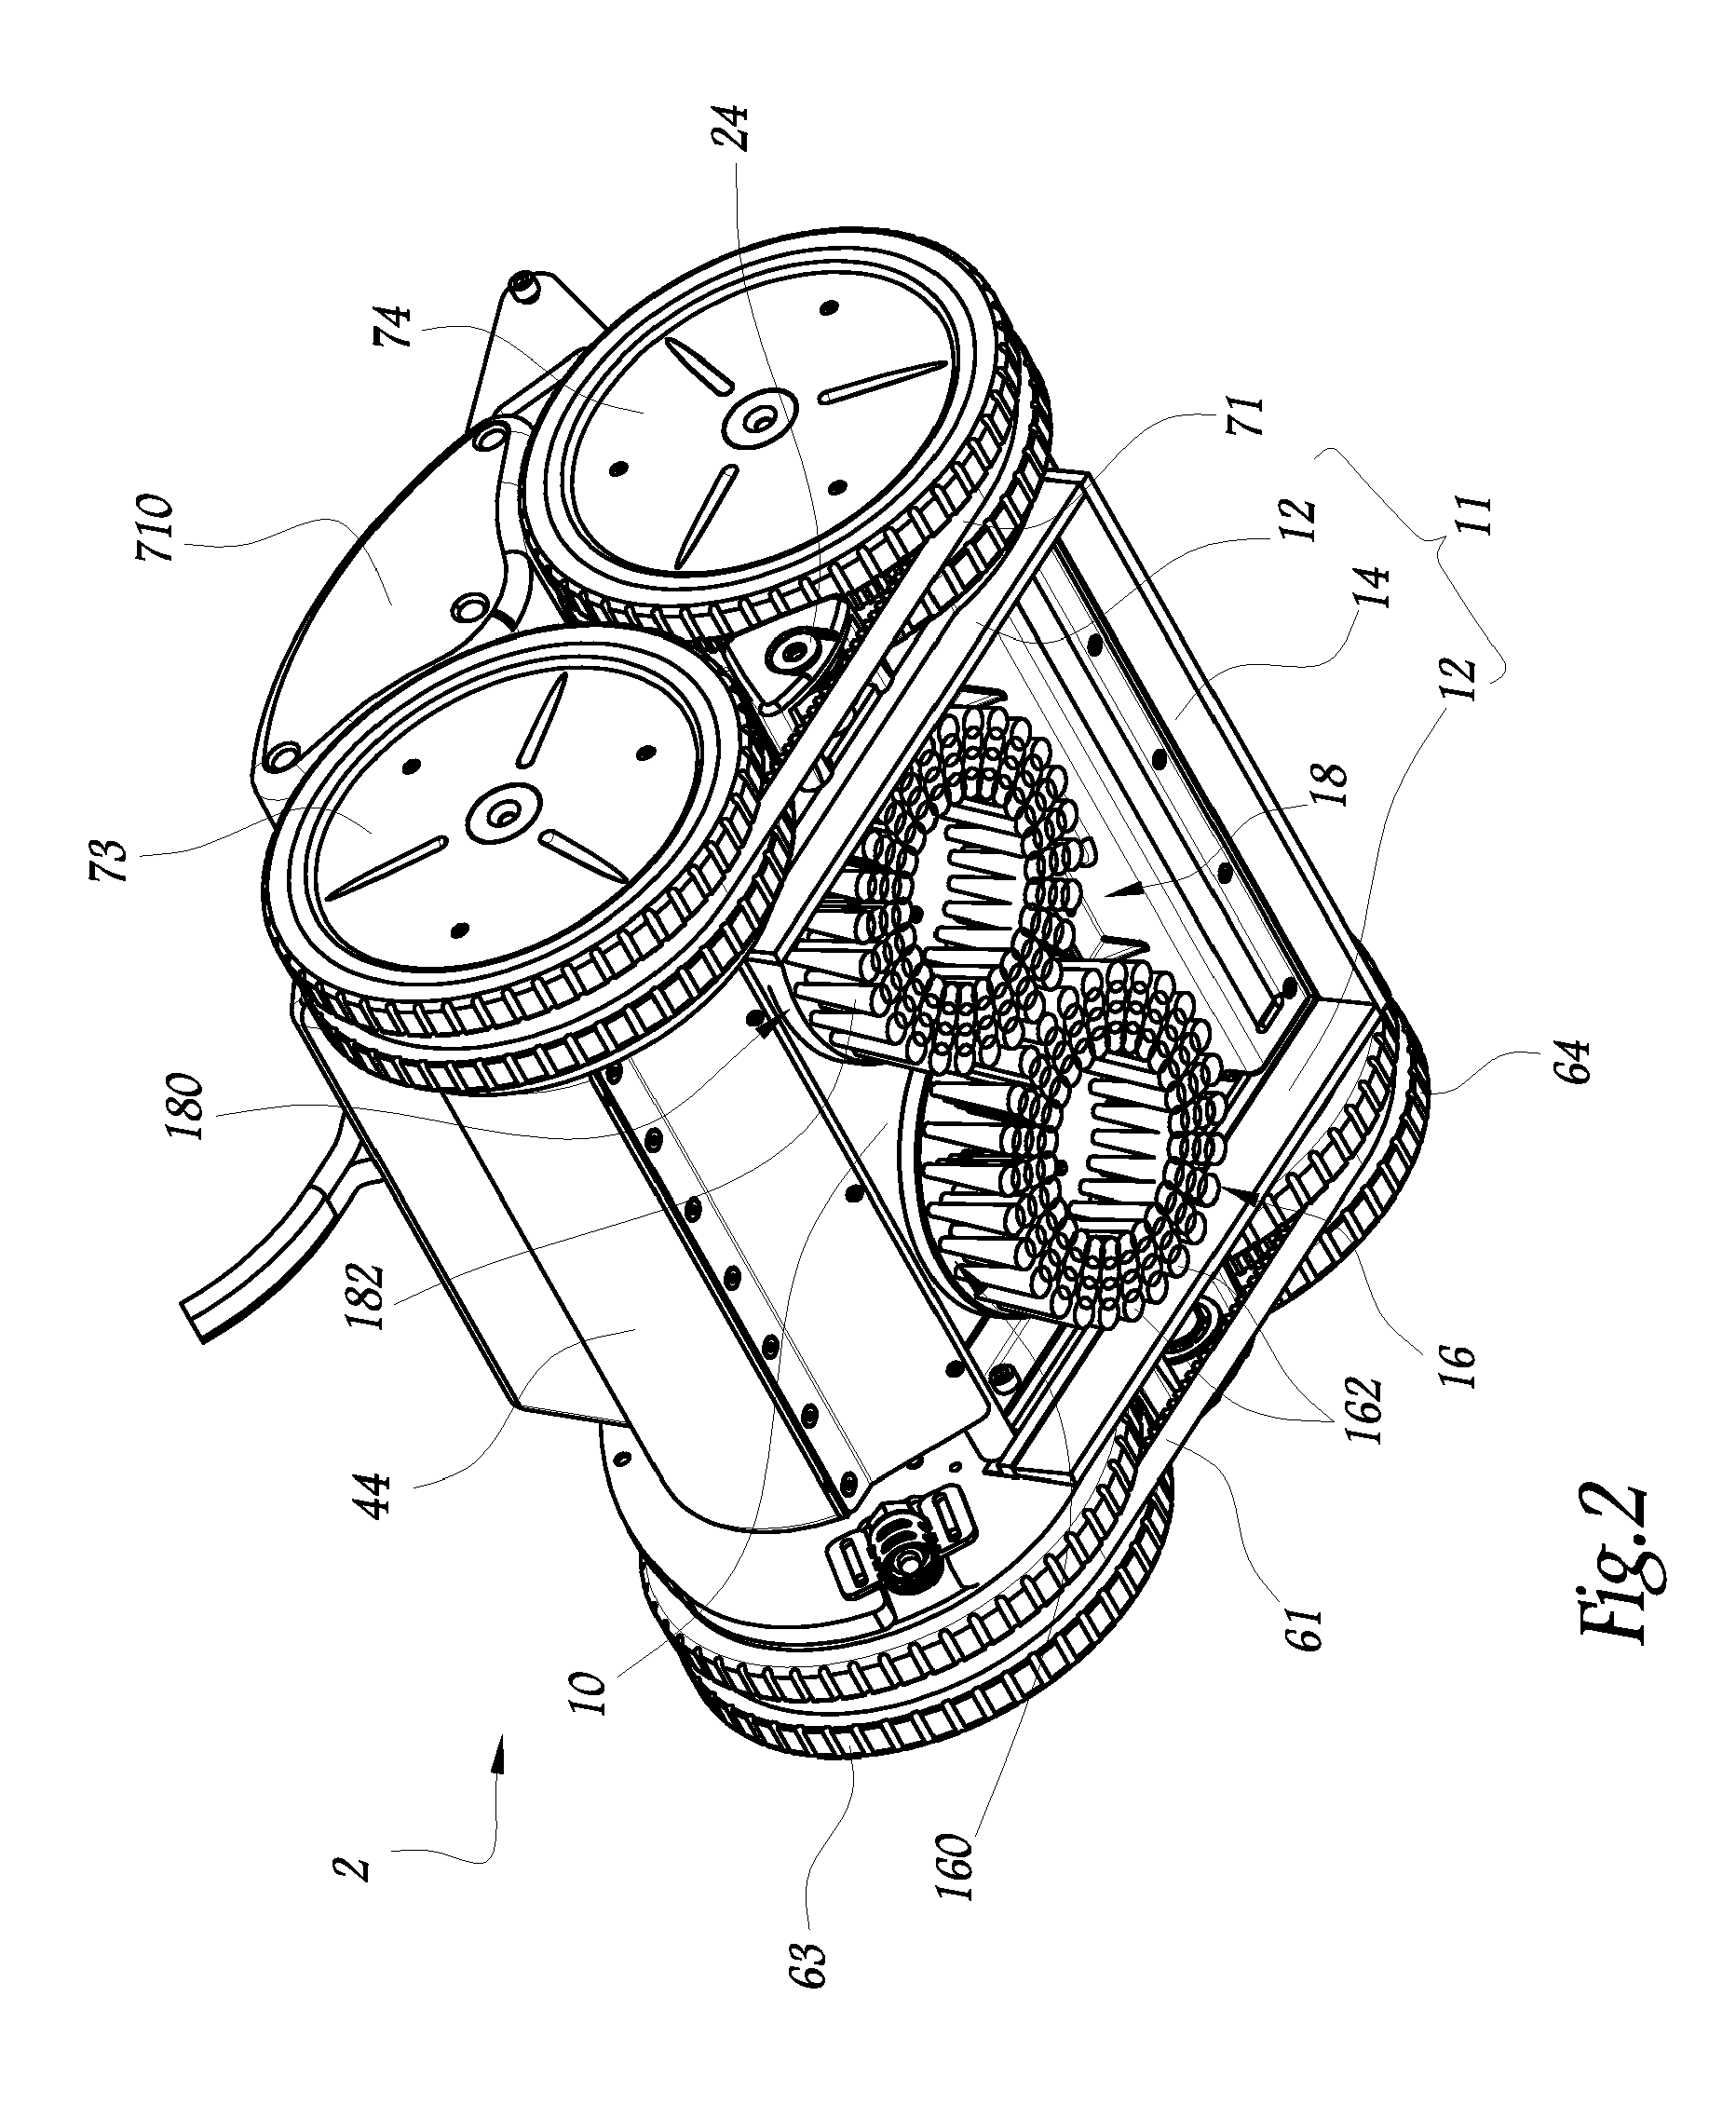 Underwater vehicle for cleaning submerged surfaces